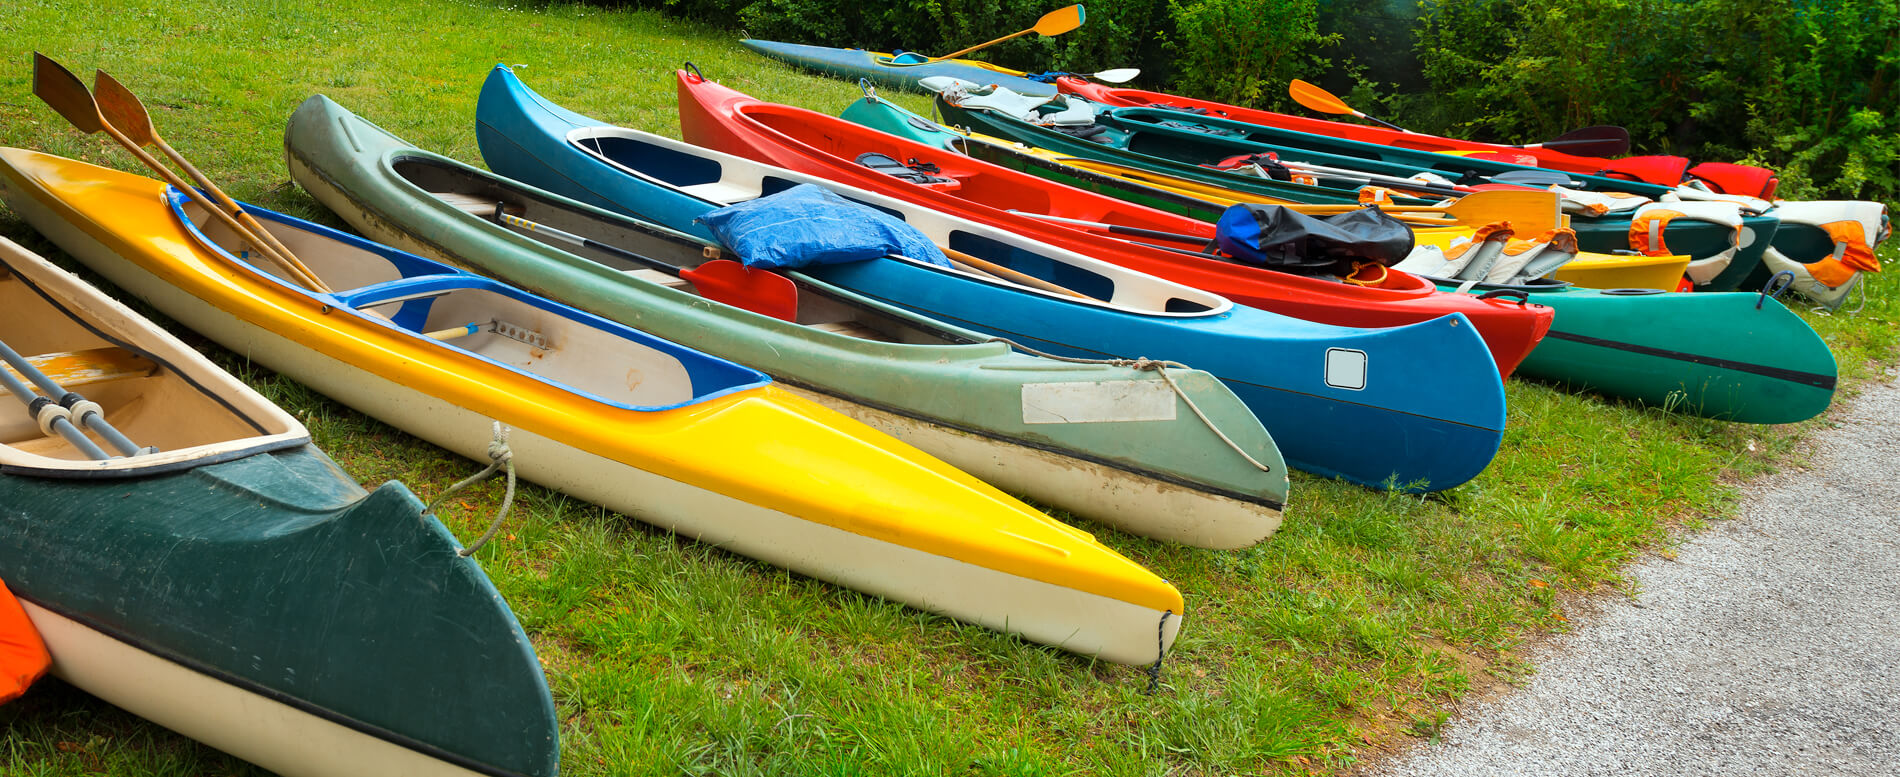 Different types of Canoe and Kayak on the ground